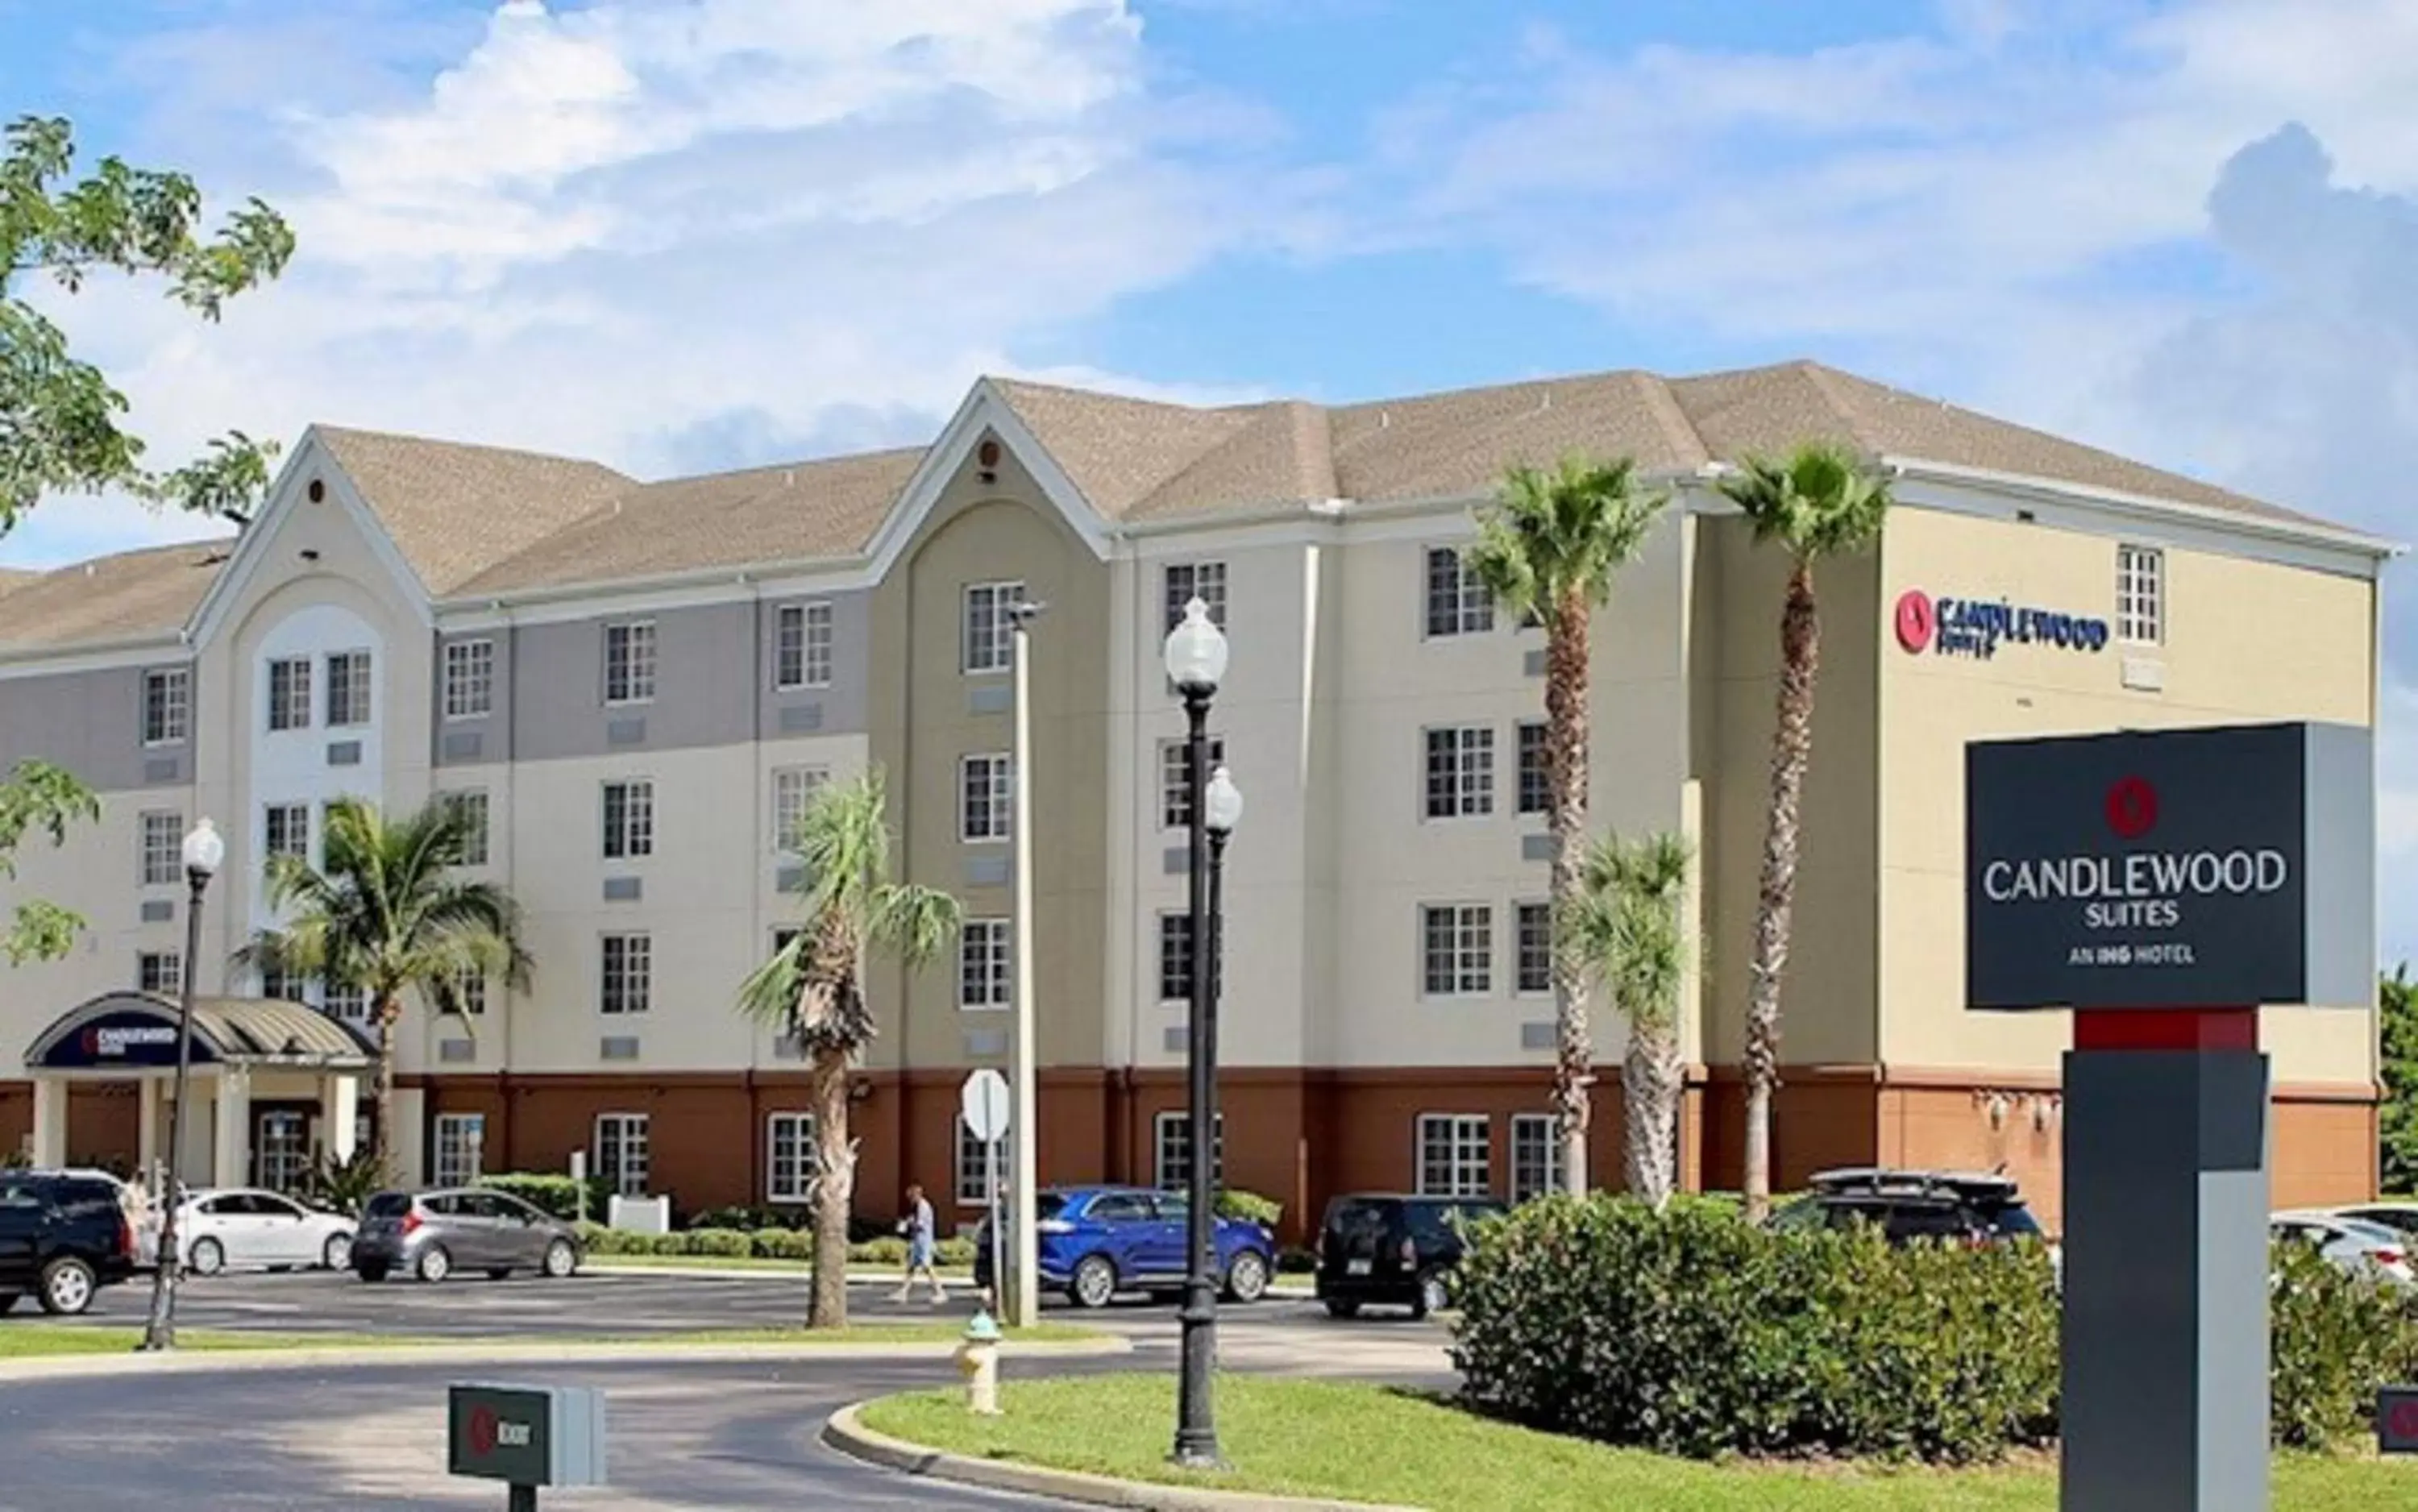 Property building in Candlewood Suites Melbourne-Viera, an IHG Hotel